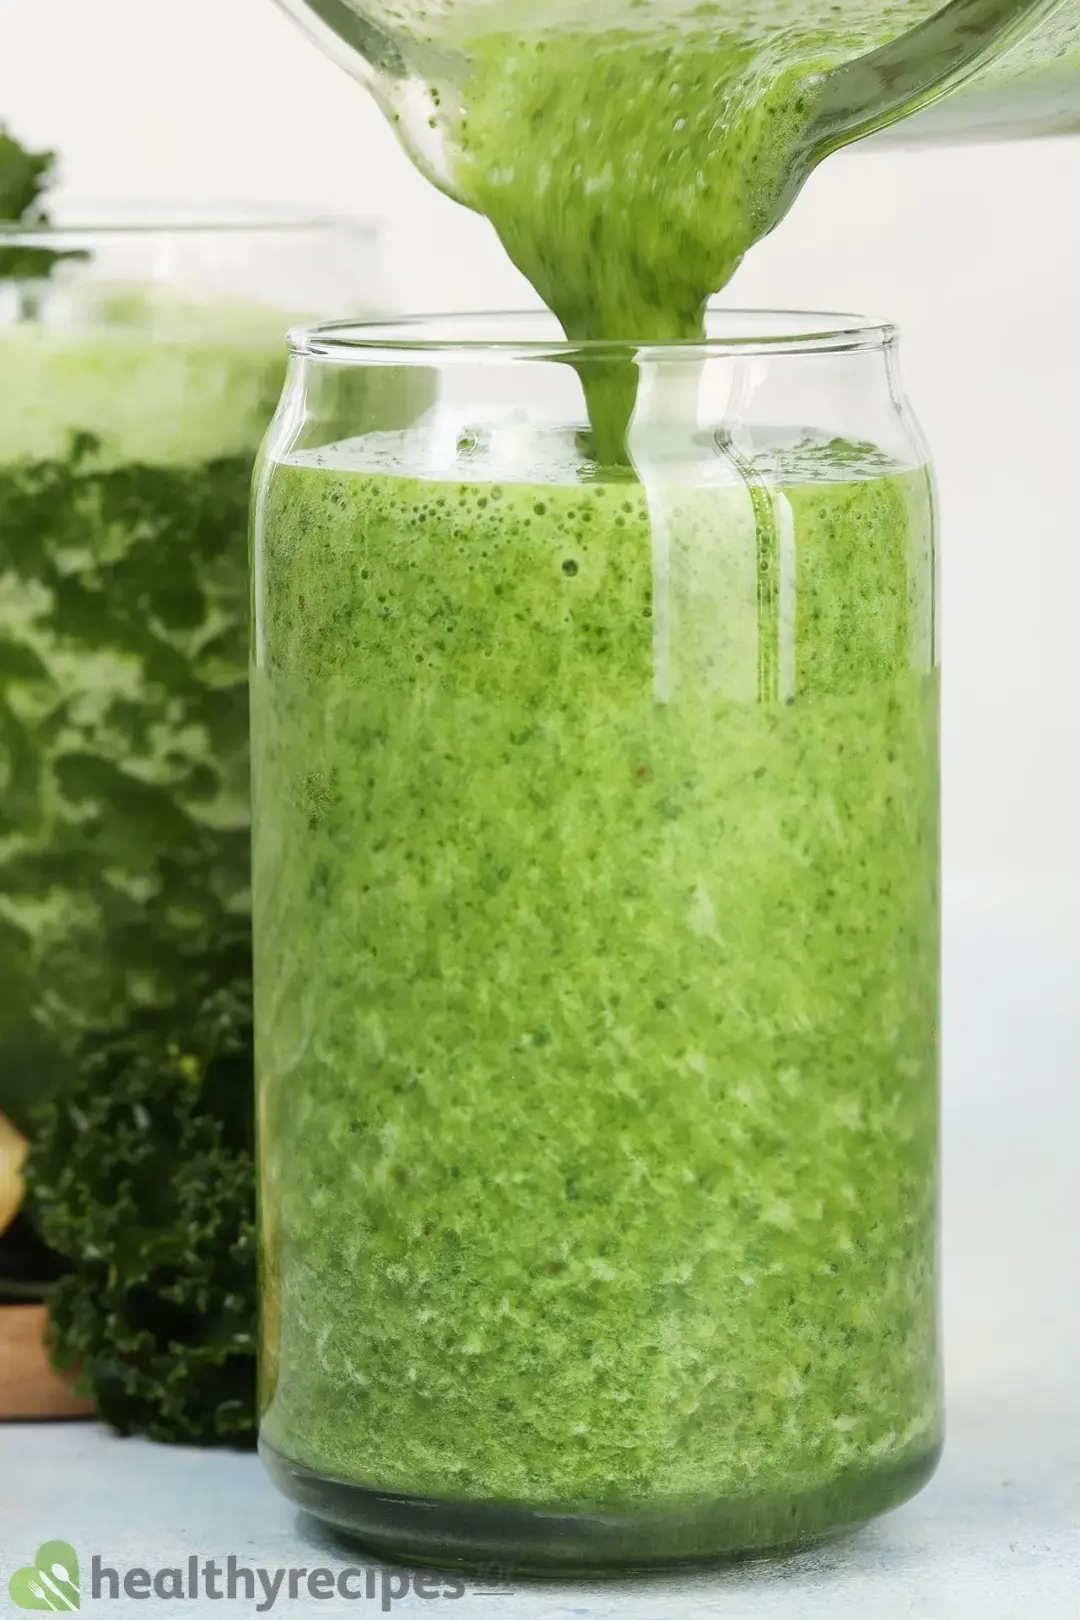 Benefits of Kale in kale spinach smoothie